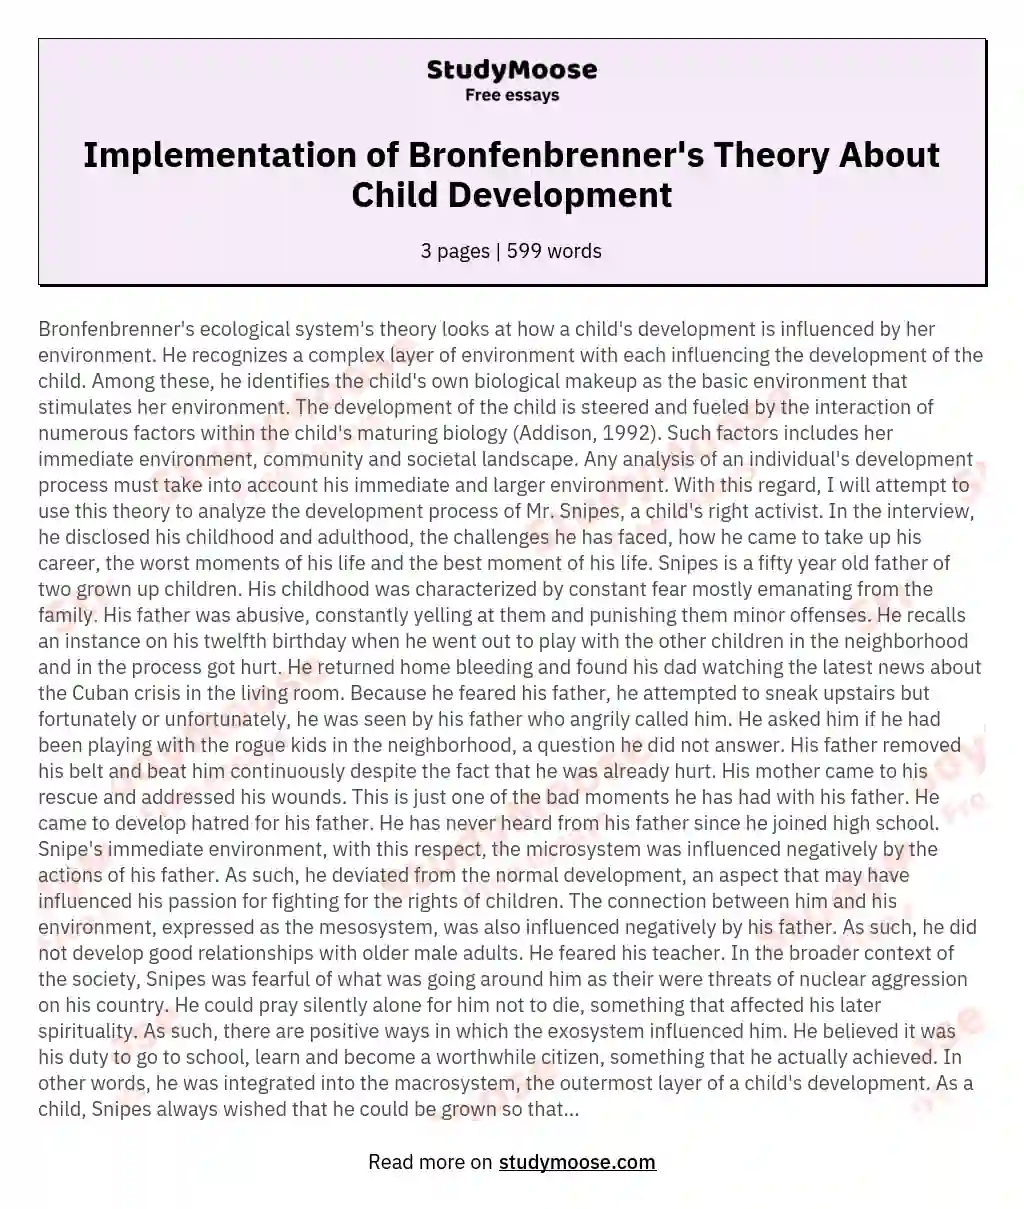 Implementation of Bronfenbrenner's Theory About Child Development